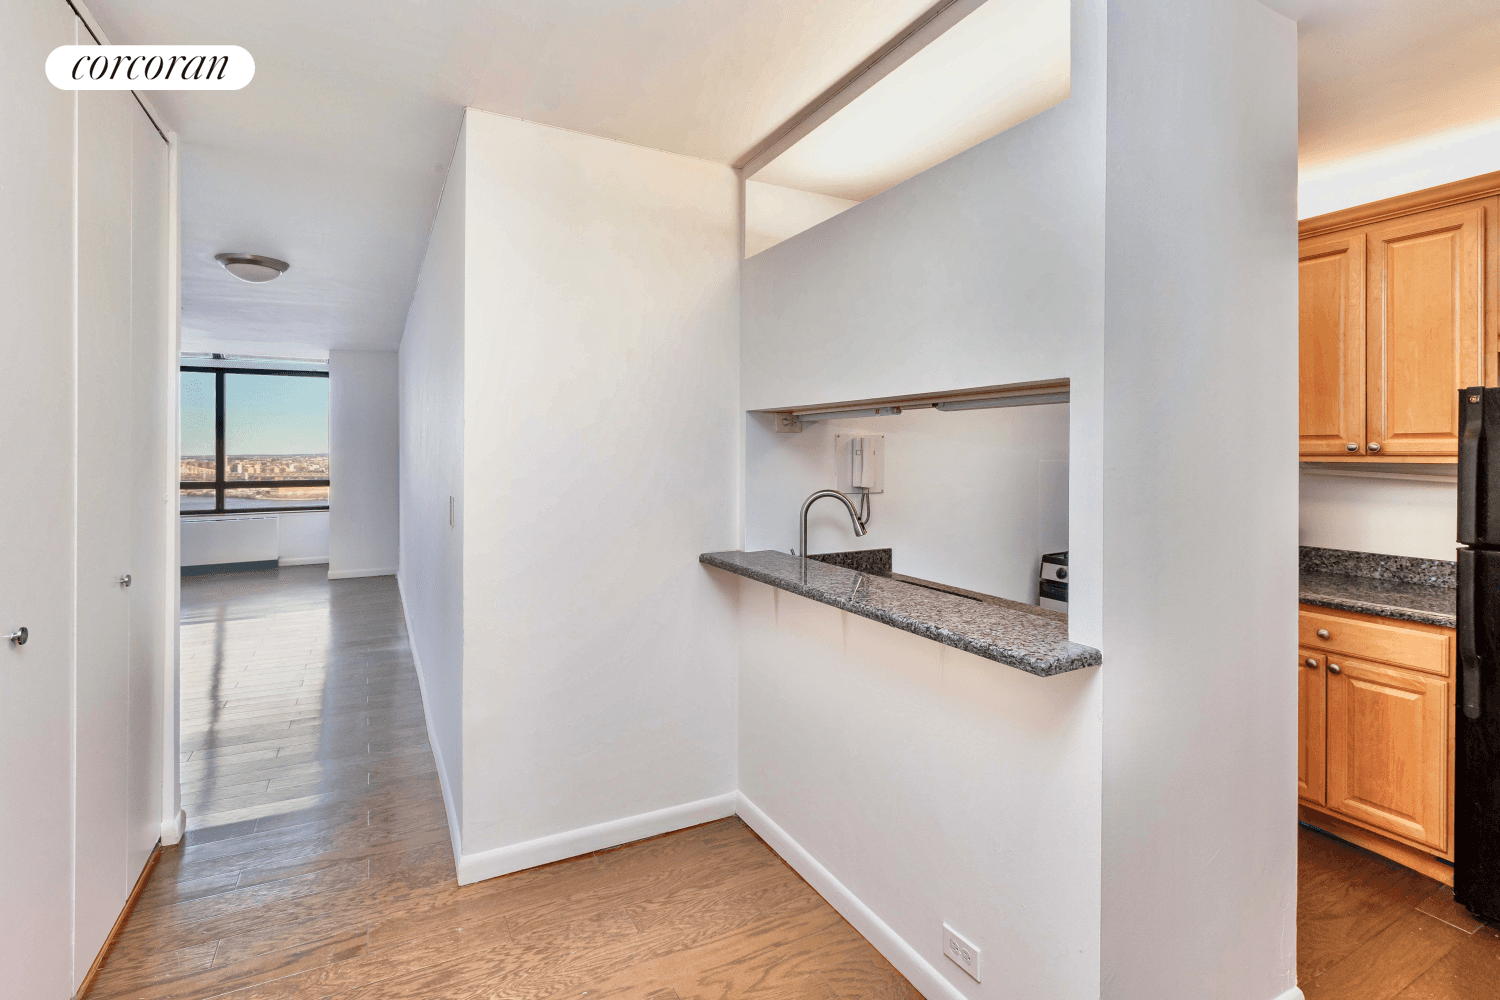 Welcome to this gorgeous Penthouse, 1 Bed 1 Bath Top floor condominium.